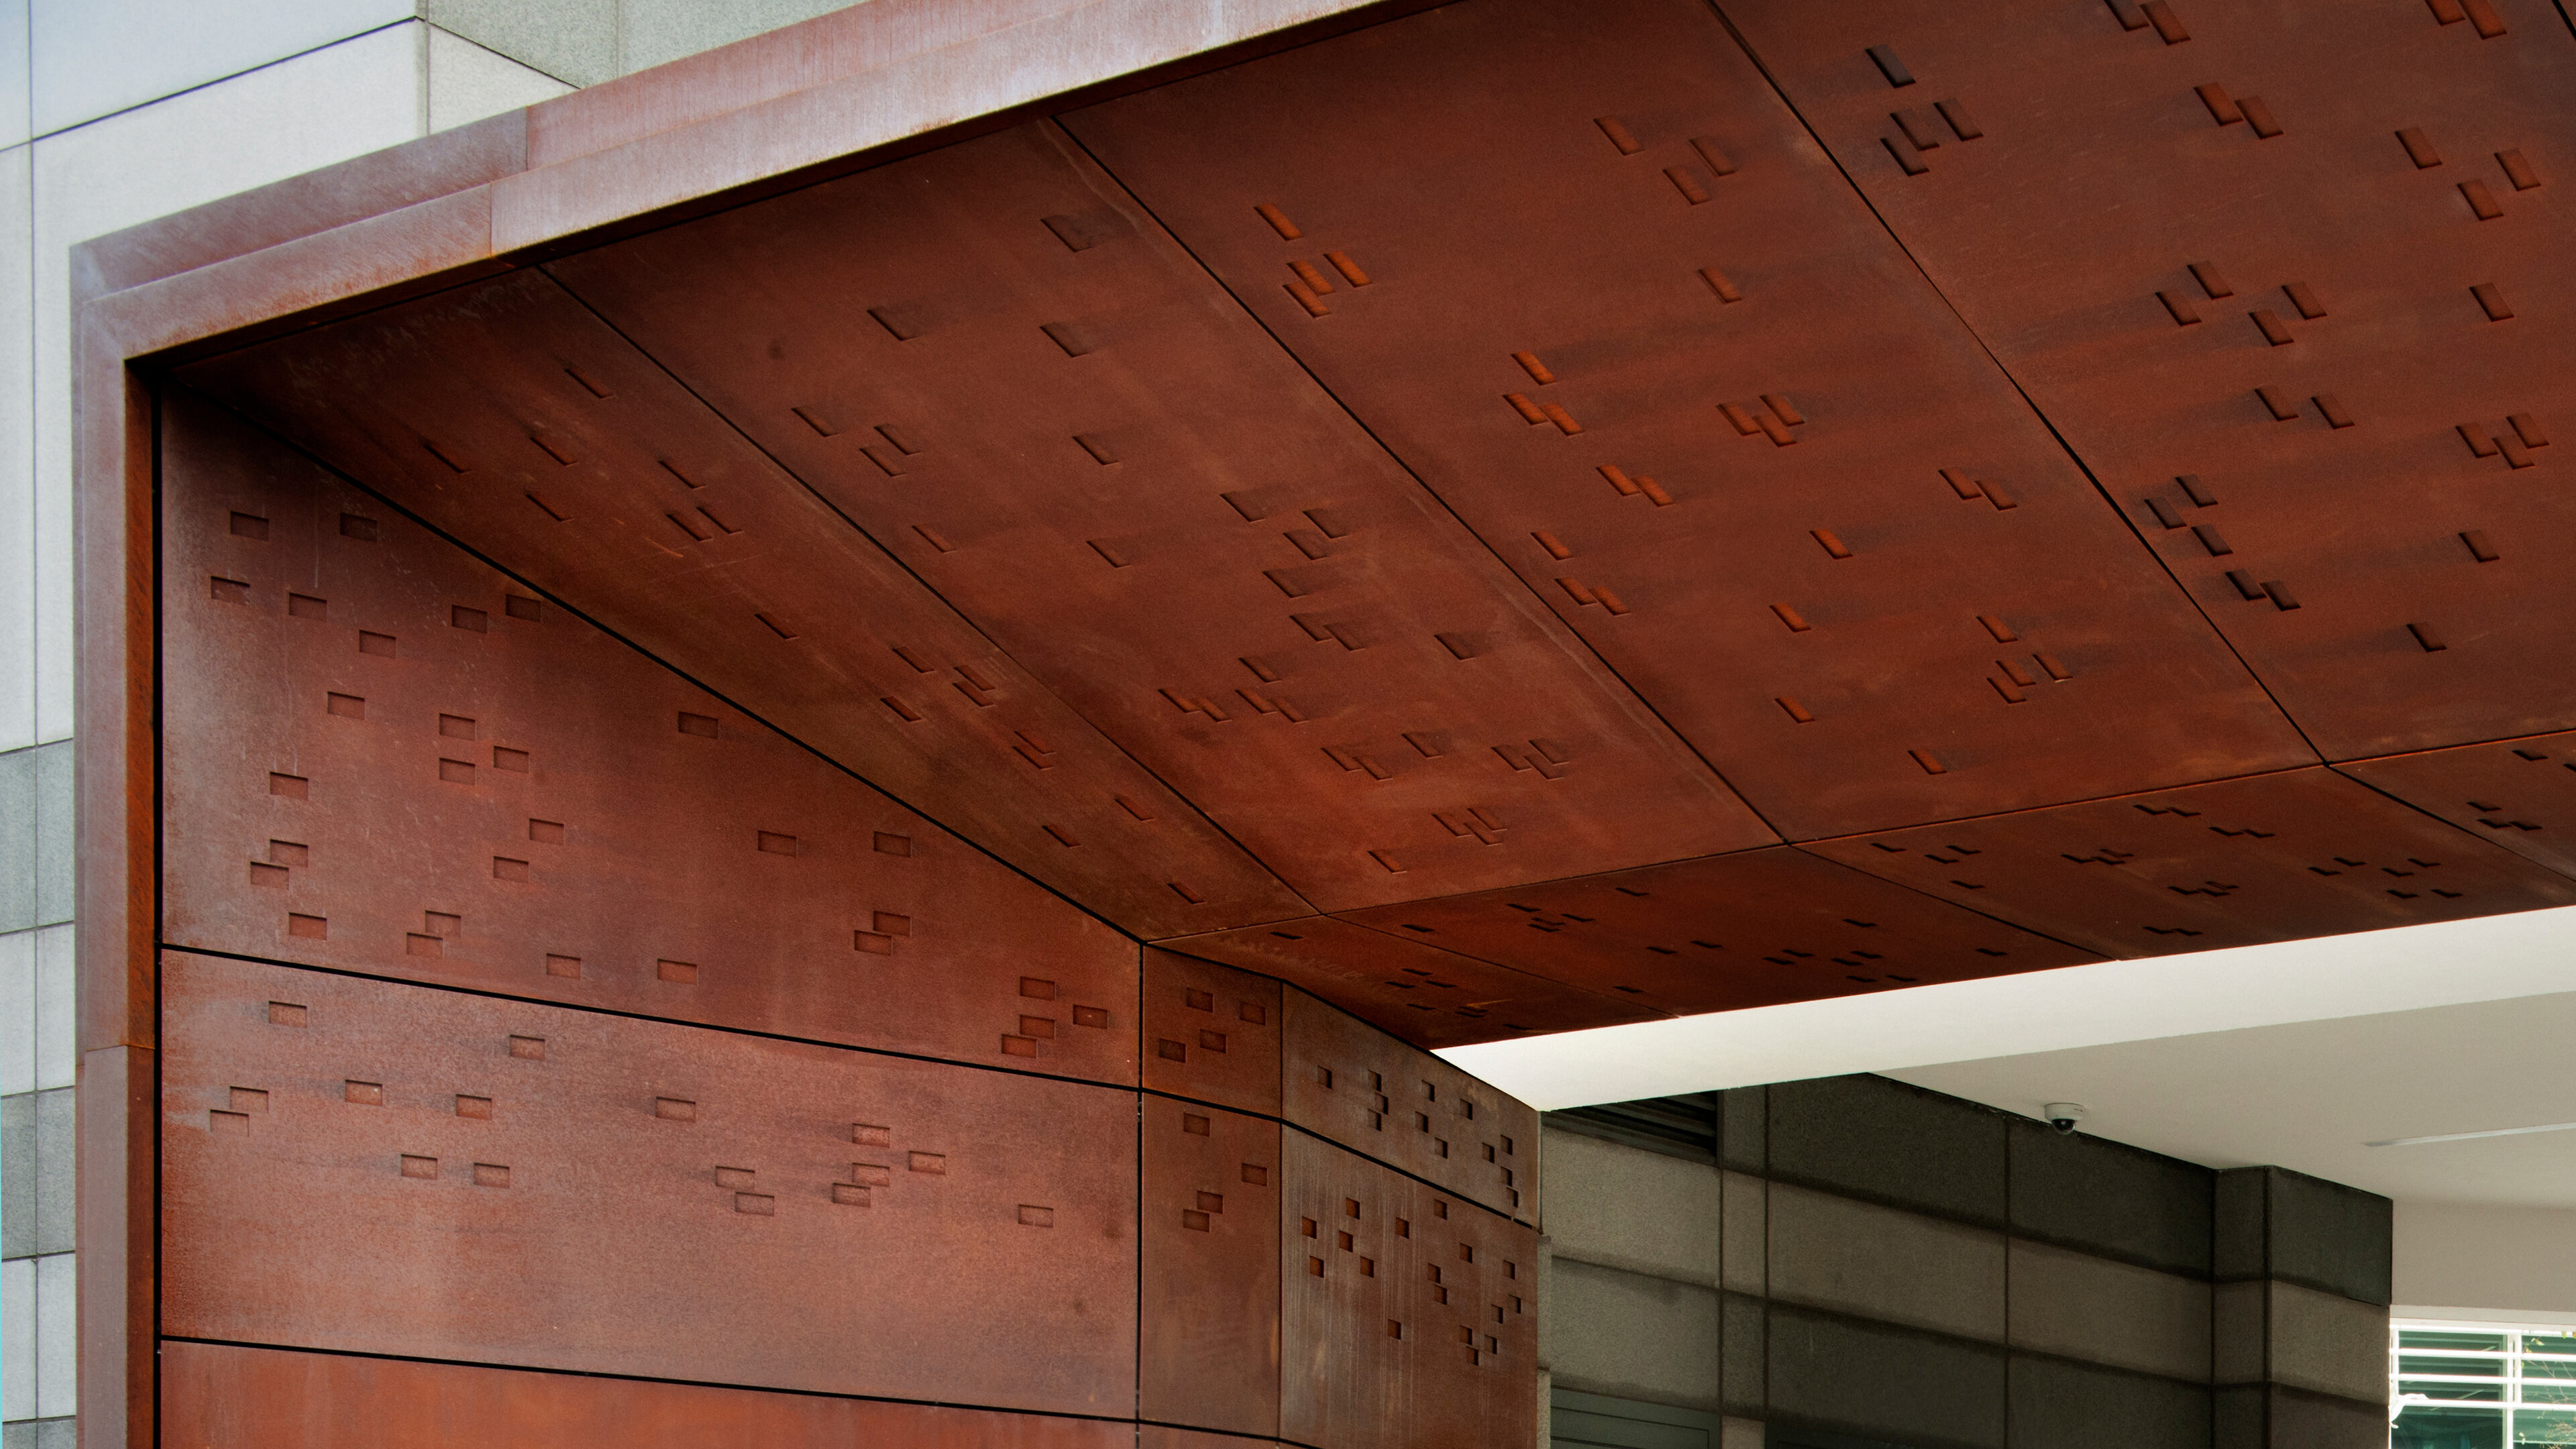 POHL weathering steel: Thomas More Square